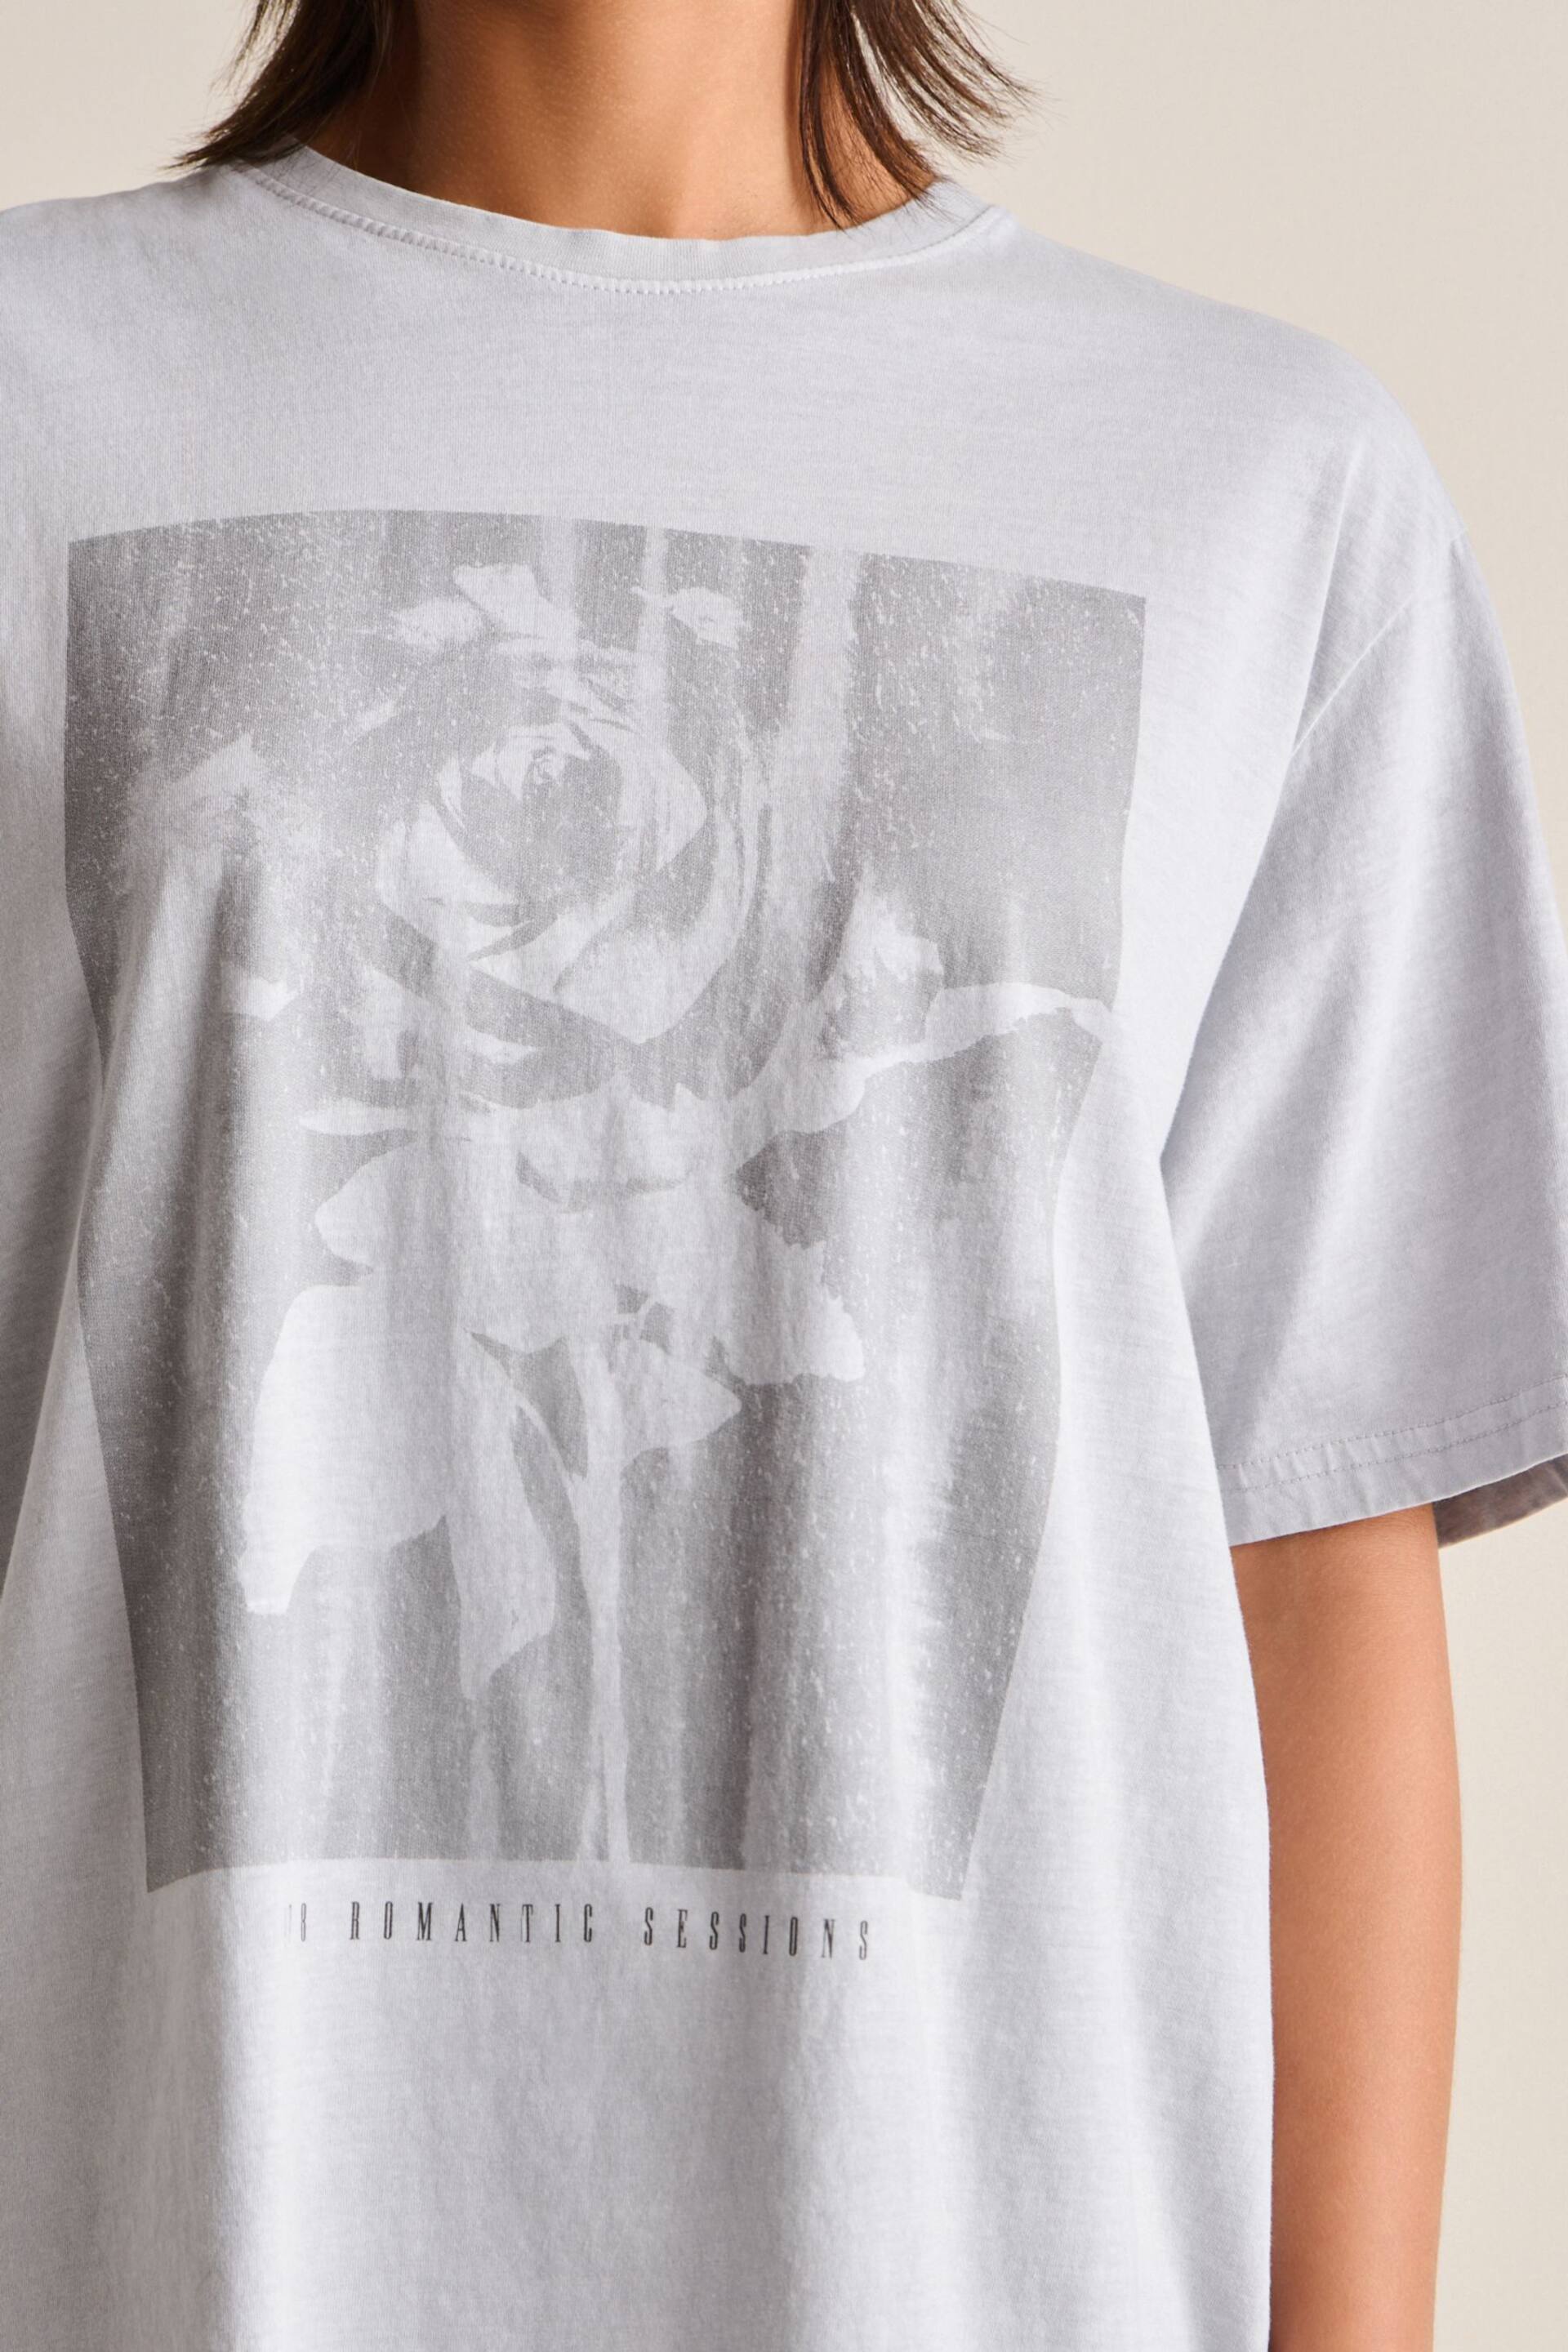 Grey Wash Grungy Rose Graphic T-Shirt - Image 4 of 6